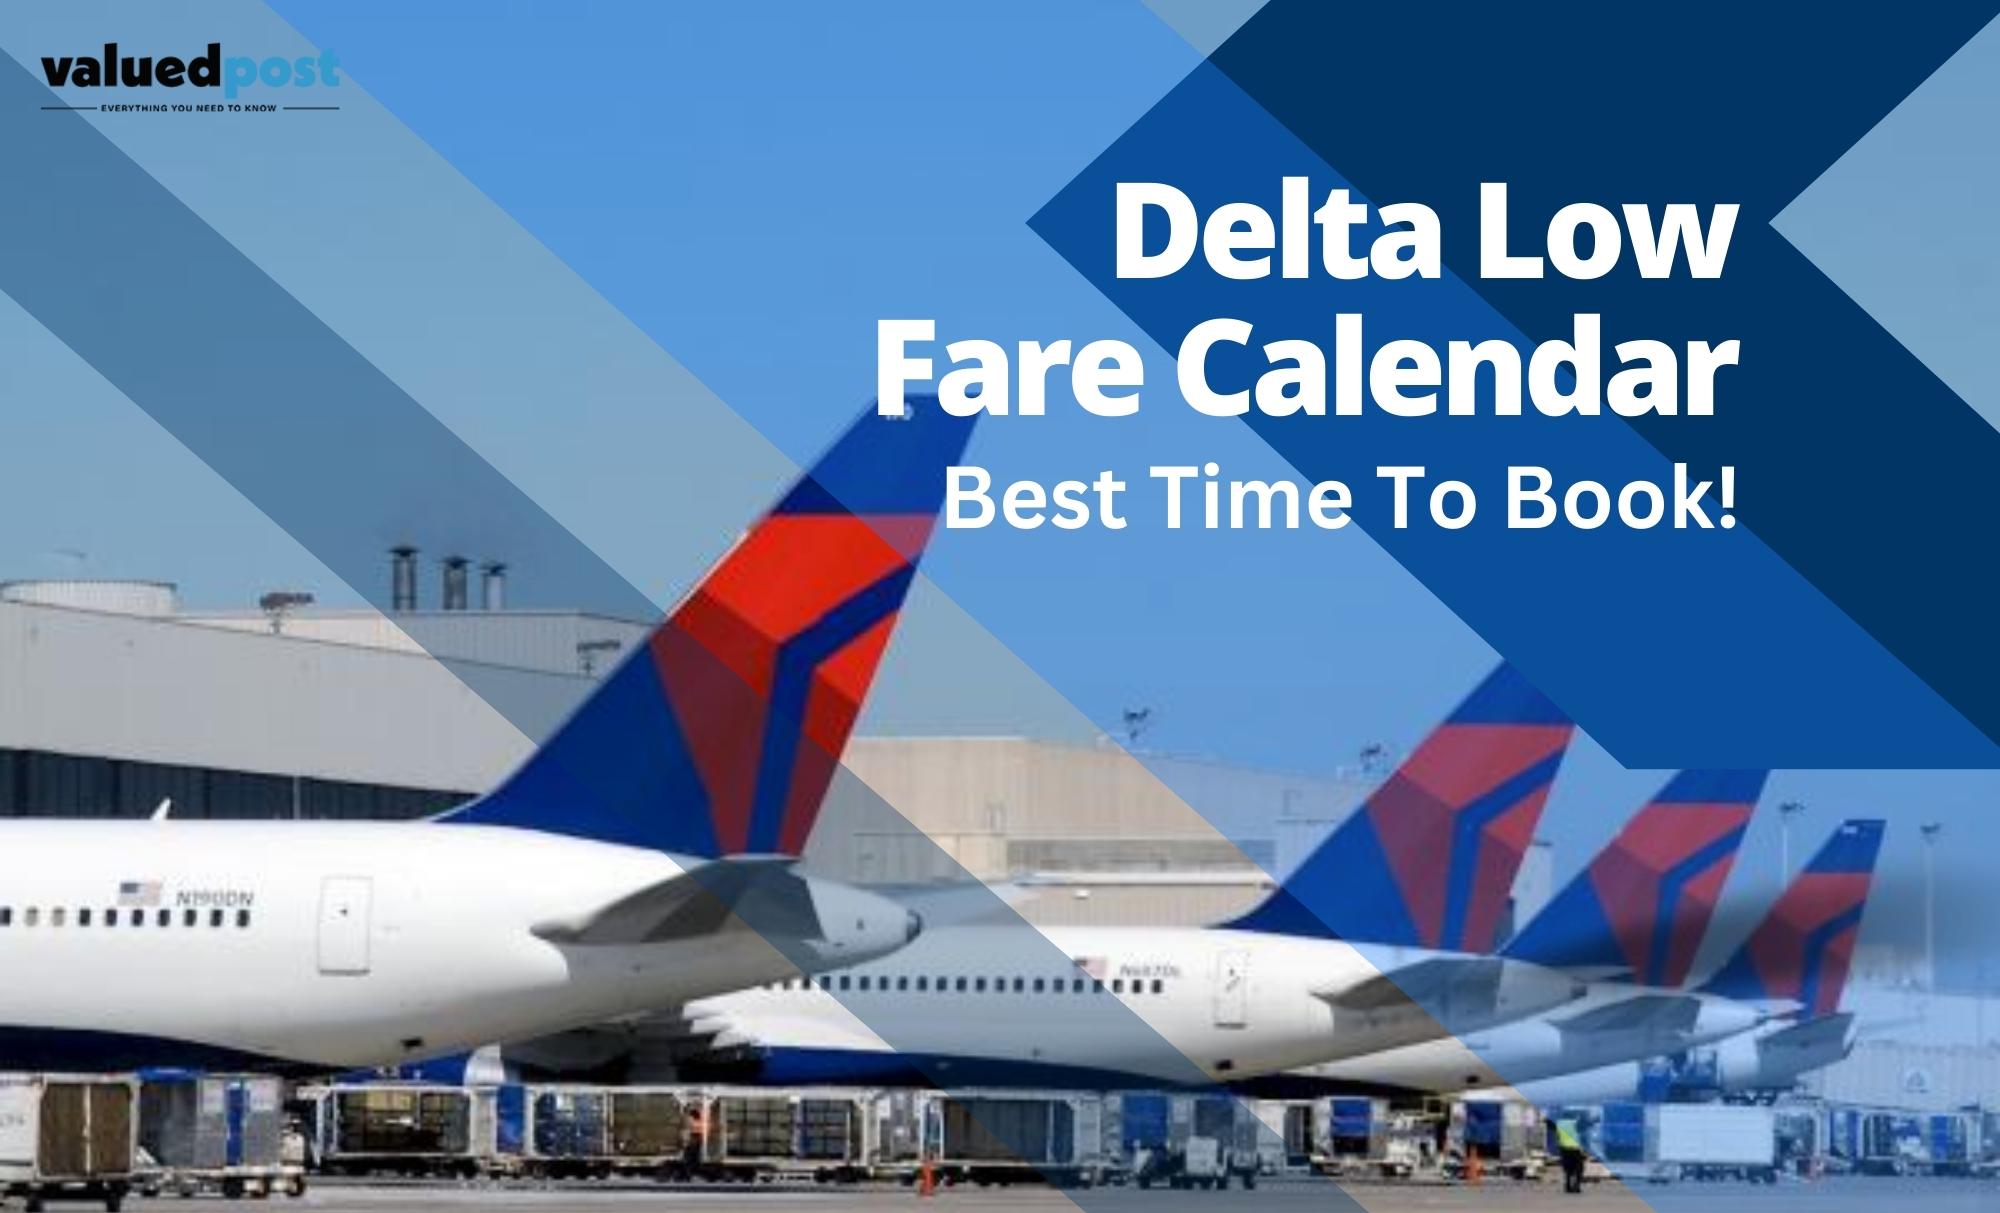 Delta Low Fare Calendar: Looking For The Best Time To Book?